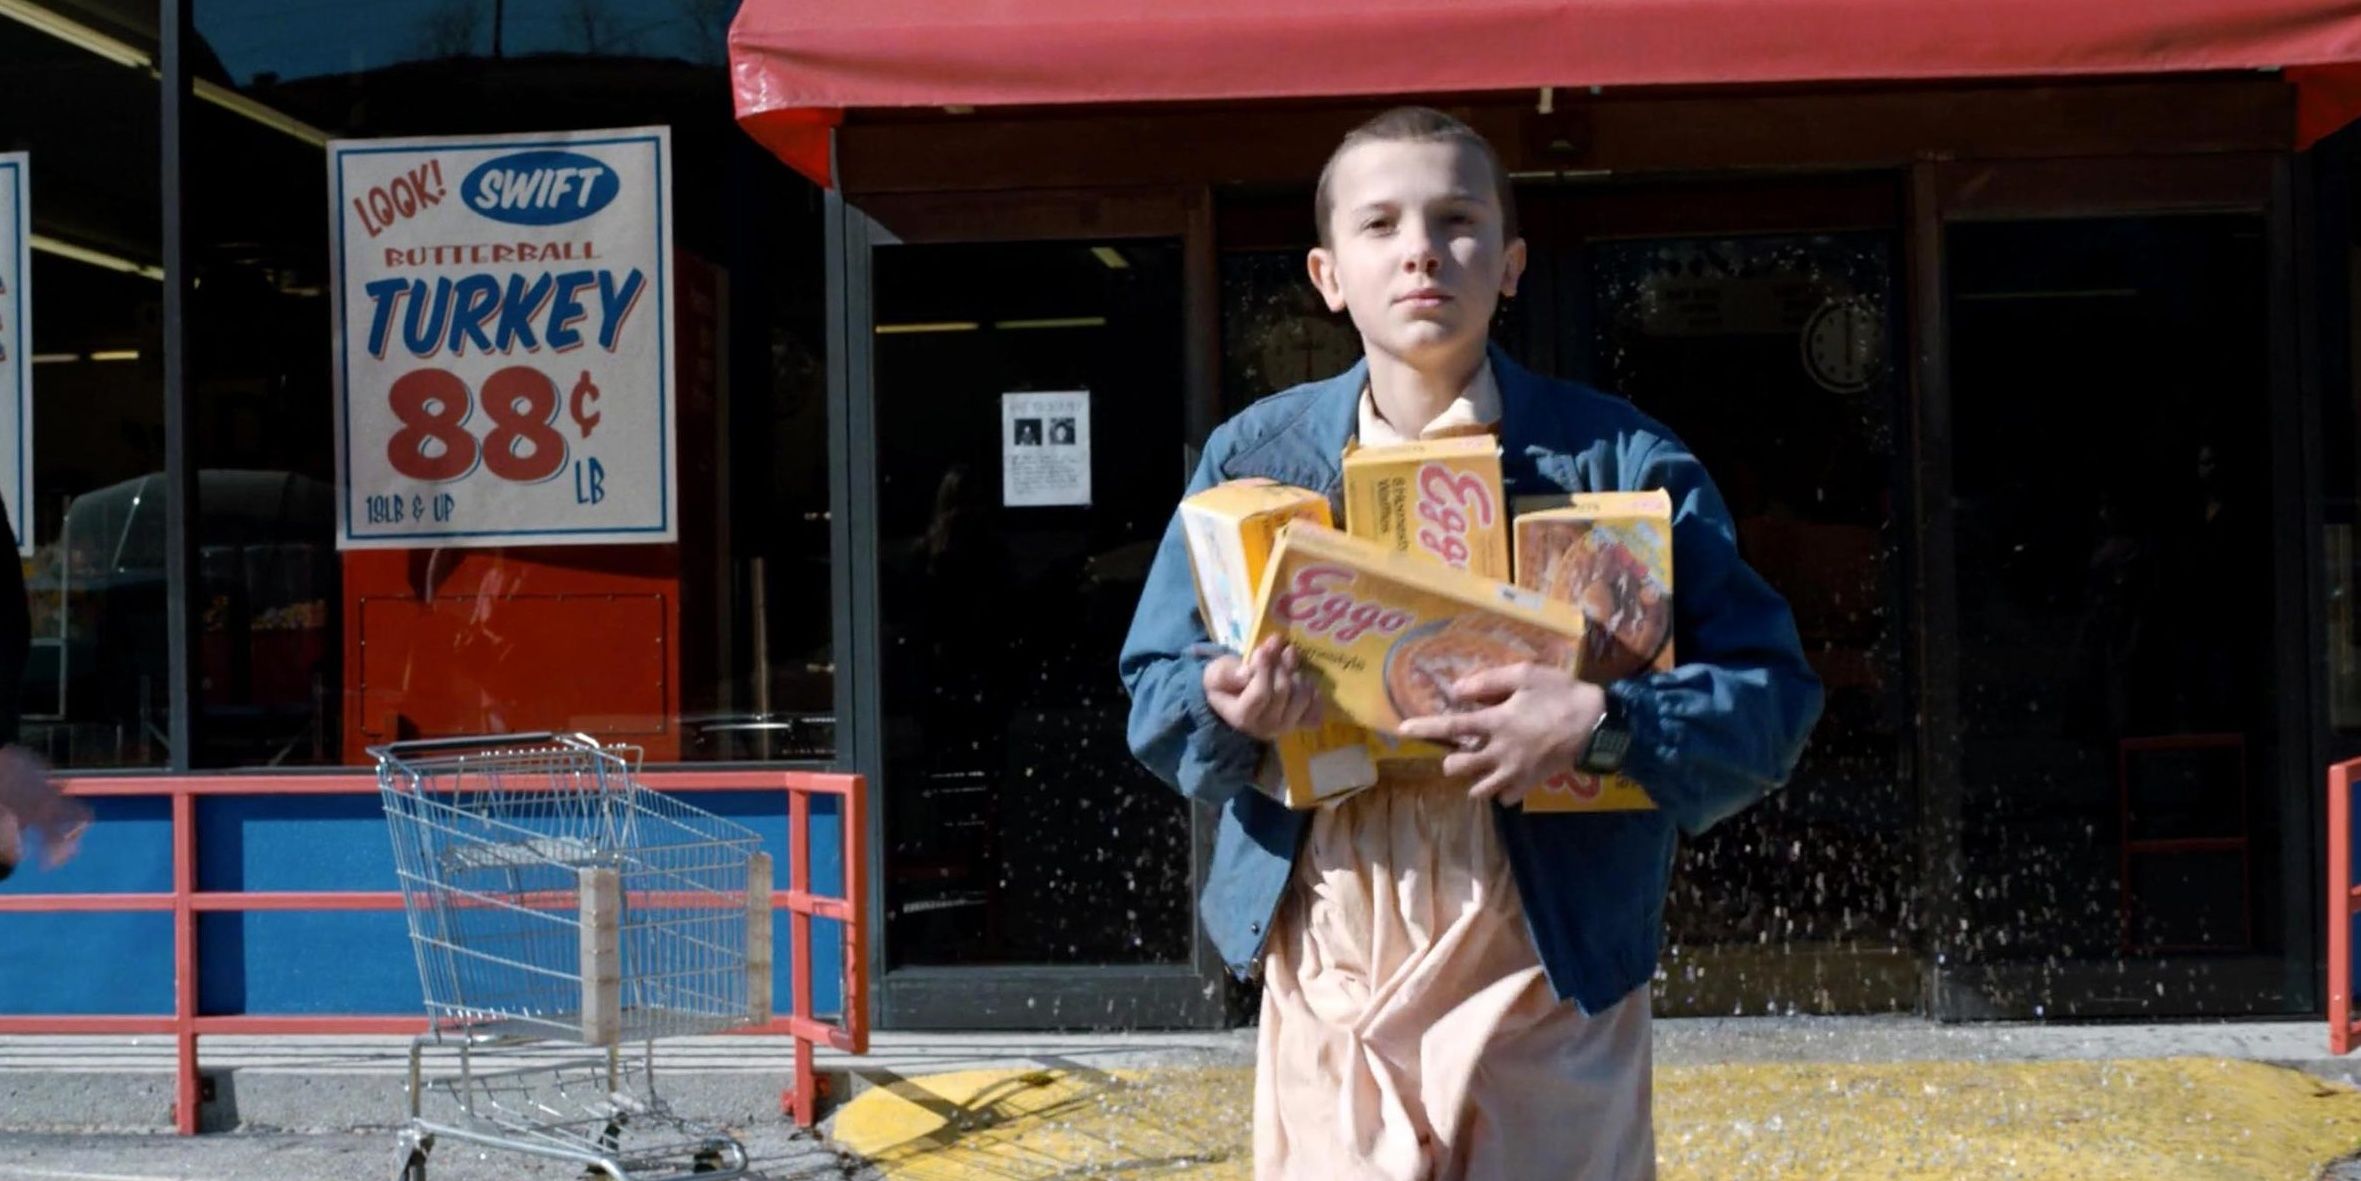 15 Best Quotes From Stranger Things